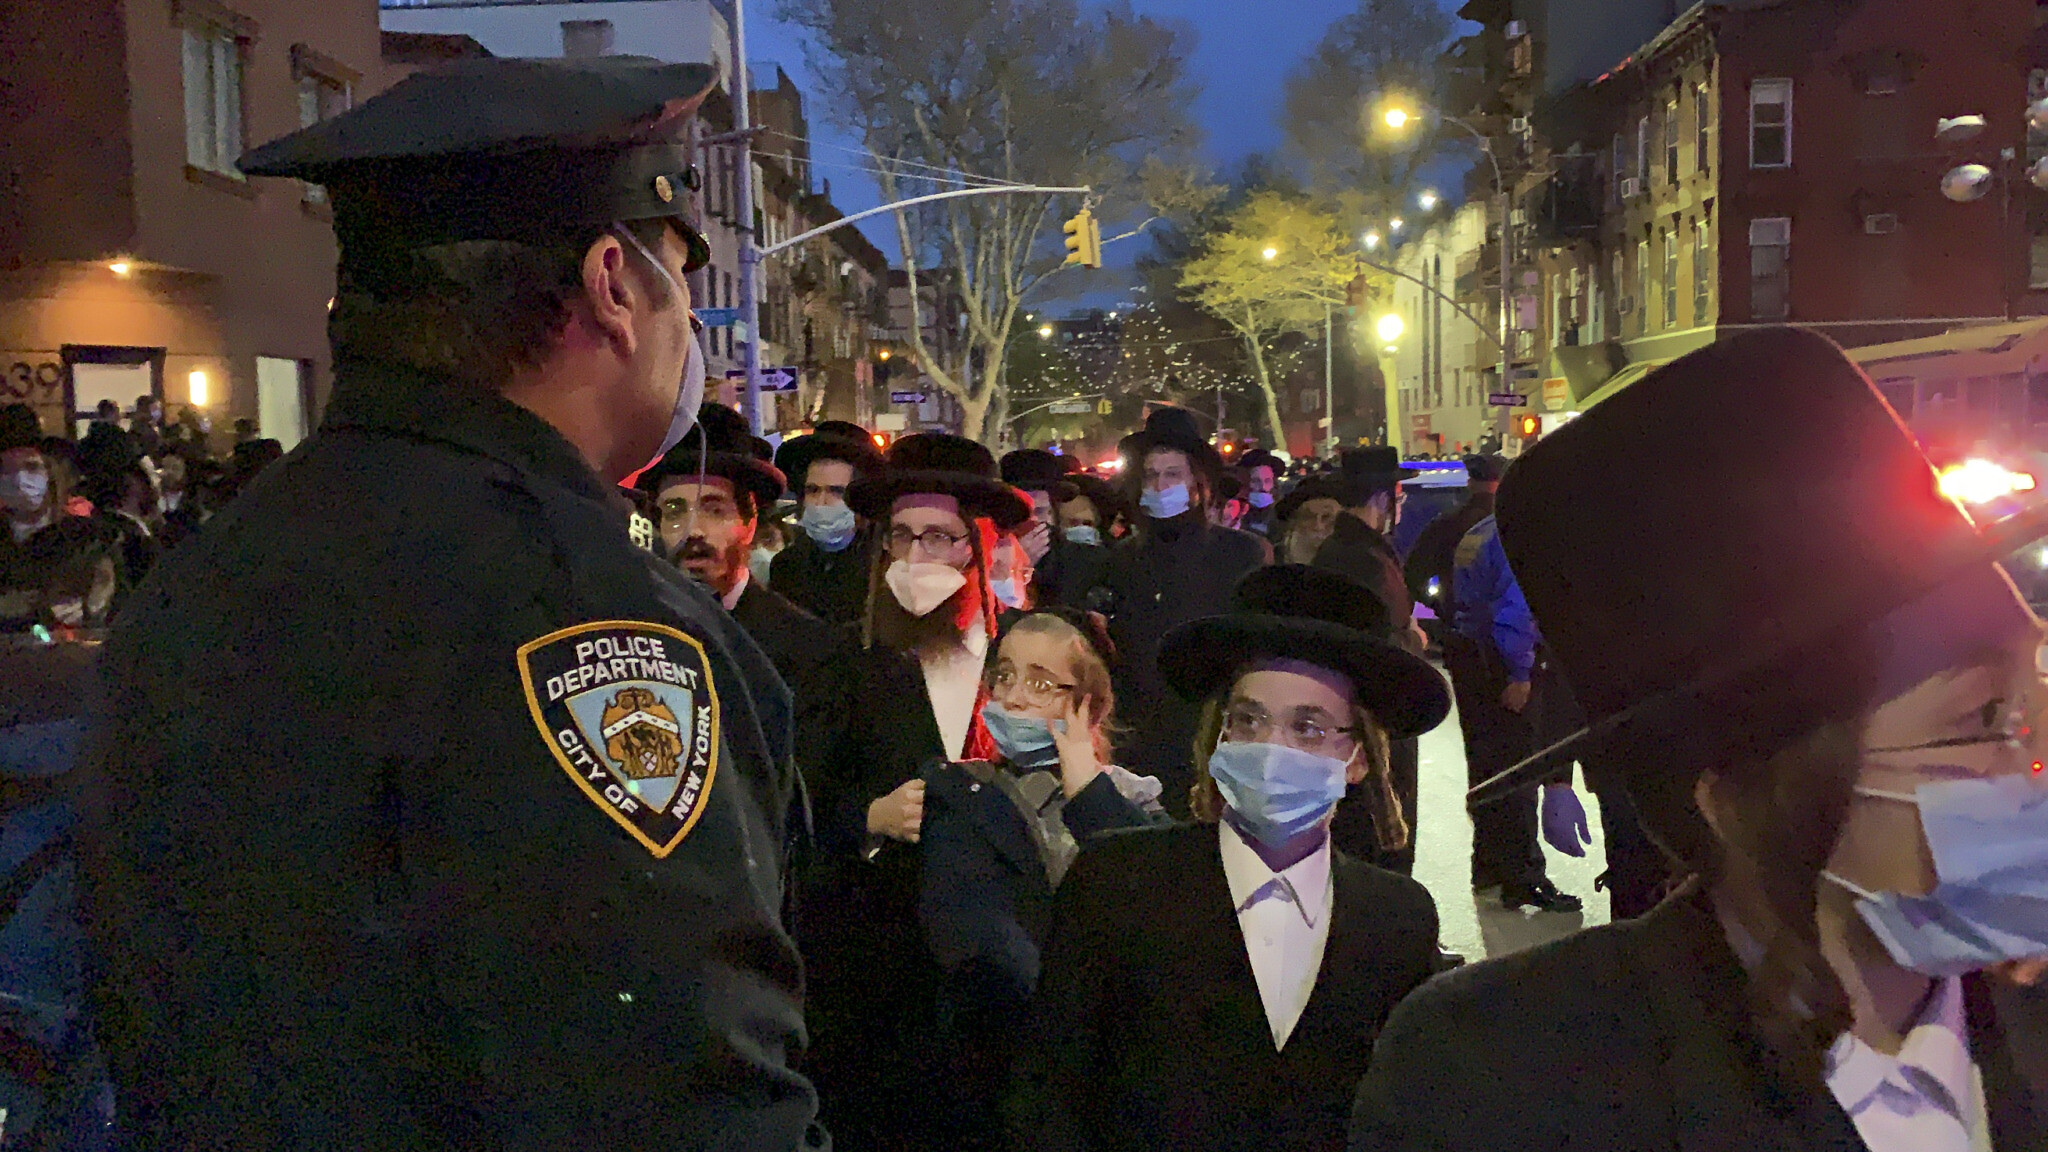 A New York City police officer keeps watch as hundreds of mourners gather in the Brooklyn borough of New York, Tuesday, April 28, 2020, to observe a funeral for Rabbi Chaim Mertz, a Hasidic Orthodox leader whose death was reportedly tied to the coronavirus. (Peter Gerber via AP)